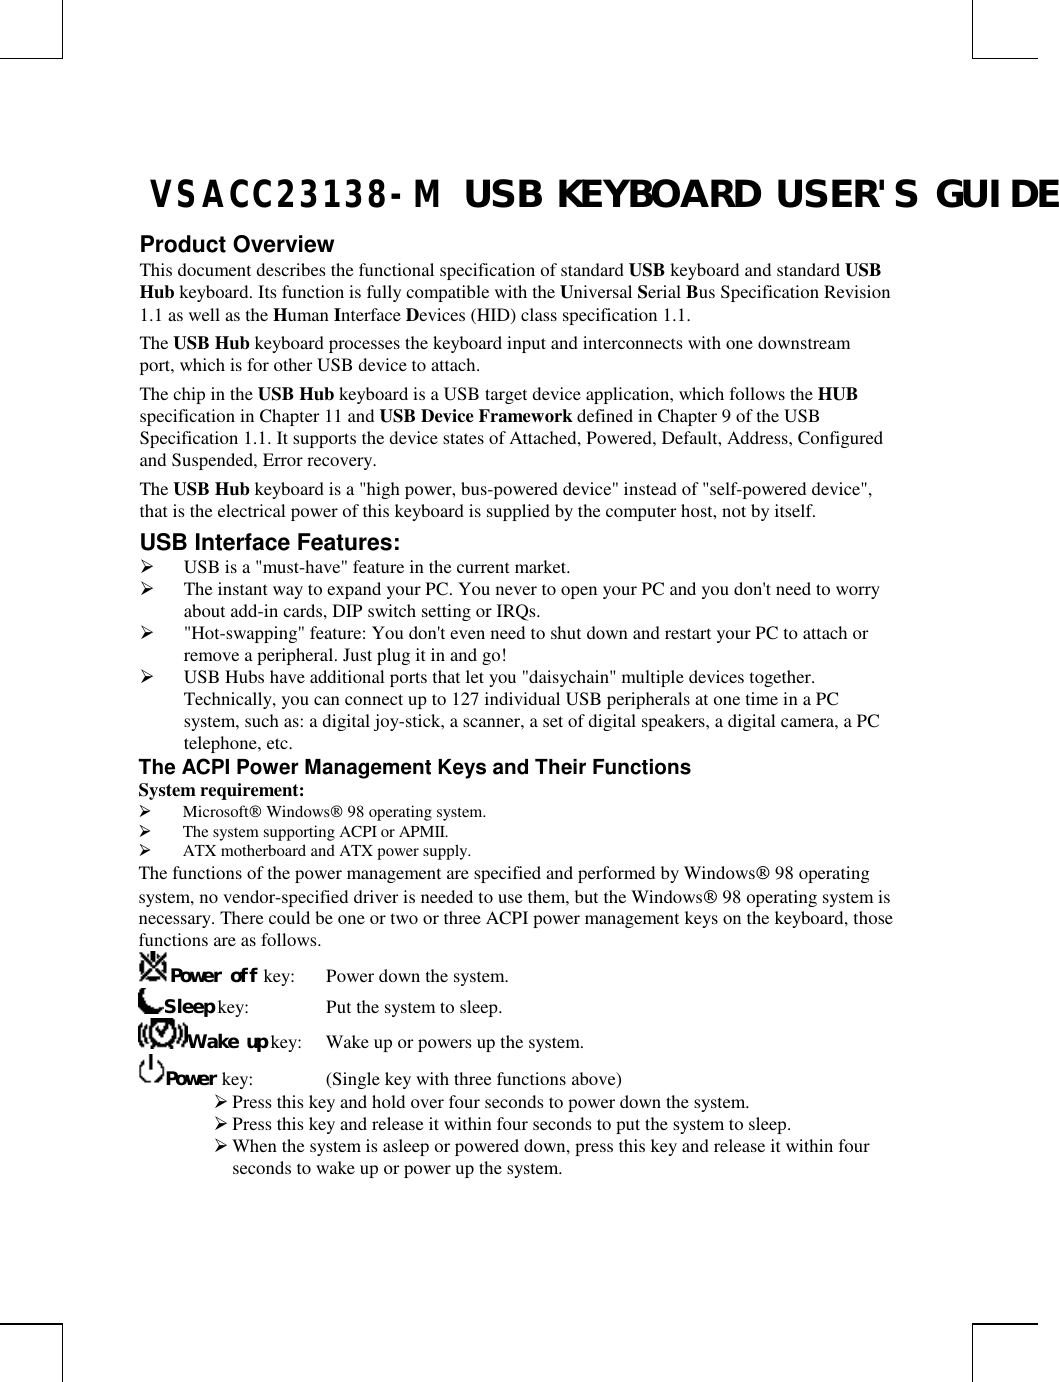 VSACC23138-M USB KEYBOARD USER&apos;S GUIDEProduct OverviewThis document describes the functional specification of standard USB keyboard and standard USBHub keyboard. Its function is fully compatible with the Universal Serial Bus Specification Revision1.1 as well as the Human Interface Devices (HID) class specification 1.1.The USB Hub keyboard processes the keyboard input and interconnects with one downstreamport, which is for other USB device to attach.The chip in the USB Hub keyboard is a USB target device application, which follows the HUBspecification in Chapter 11 and USB Device Framework defined in Chapter 9 of the USBSpecification 1.1. It supports the device states of Attached, Powered, Default, Address, Configuredand Suspended, Error recovery.The USB Hub keyboard is a &quot;high power, bus-powered device&quot; instead of &quot;self-powered device&quot;,that is the electrical power of this keyboard is supplied by the computer host, not by itself.USB Interface Features: USB is a &quot;must-have&quot; feature in the current market. The instant way to expand your PC. You never to open your PC and you don&apos;t need to worryabout add-in cards, DIP switch setting or IRQs. &quot;Hot-swapping&quot; feature: You don&apos;t even need to shut down and restart your PC to attach orremove a peripheral. Just plug it in and go! USB Hubs have additional ports that let you &quot;daisychain&quot; multiple devices together.Technically, you can connect up to 127 individual USB peripherals at one time in a PCsystem, such as: a digital joy-stick, a scanner, a set of digital speakers, a digital camera, a PCtelephone, etc.The ACPI Power Management Keys and Their FunctionsSystem requirement: Microsoft Windows 98 operating system. The system supporting ACPI or APMII. ATX motherboard and ATX power supply.The functions of the power management are specified and performed by Windows 98 operatingsystem, no vendor-specified driver is needed to use them, but the Windows 98 operating system isnecessary. There could be one or two or three ACPI power management keys on the keyboard, thosefunctions are as follows.Power off key: Power down the system.Sleep key: Put the system to sleep.Wake up key: Wake up or powers up the system.Power key: (Single key with three functions above) Press this key and hold over four seconds to power down the system. Press this key and release it within four seconds to put the system to sleep. When the system is asleep or powered down, press this key and release it within fourseconds to wake up or power up the system.